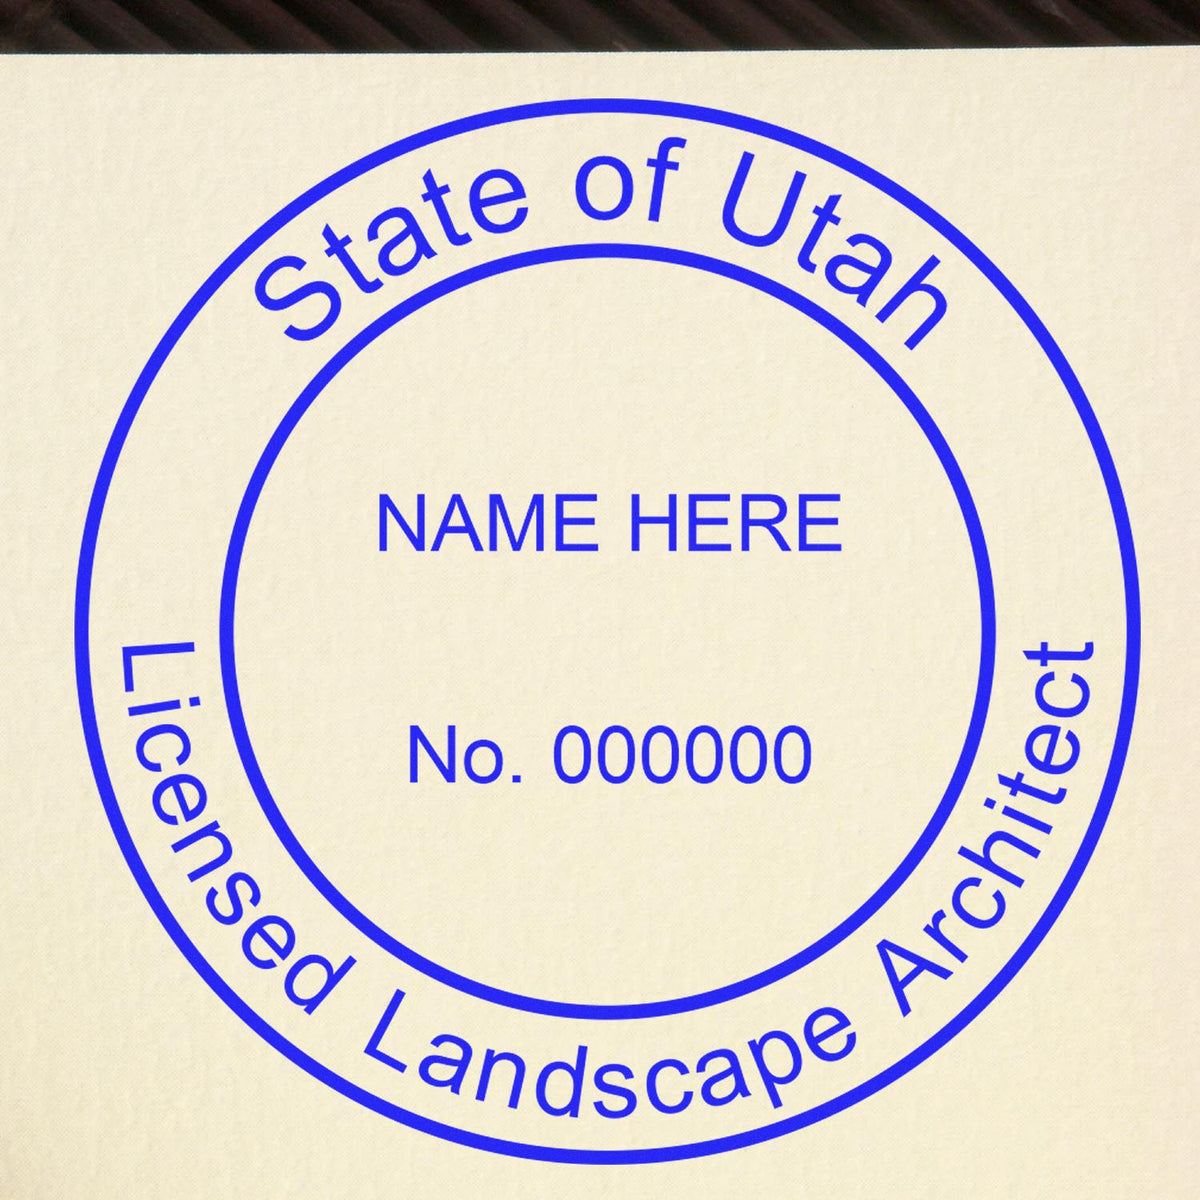 The Premium MaxLight Pre-Inked Utah Landscape Architectural Stamp stamp impression comes to life with a crisp, detailed photo on paper - showcasing true professional quality.